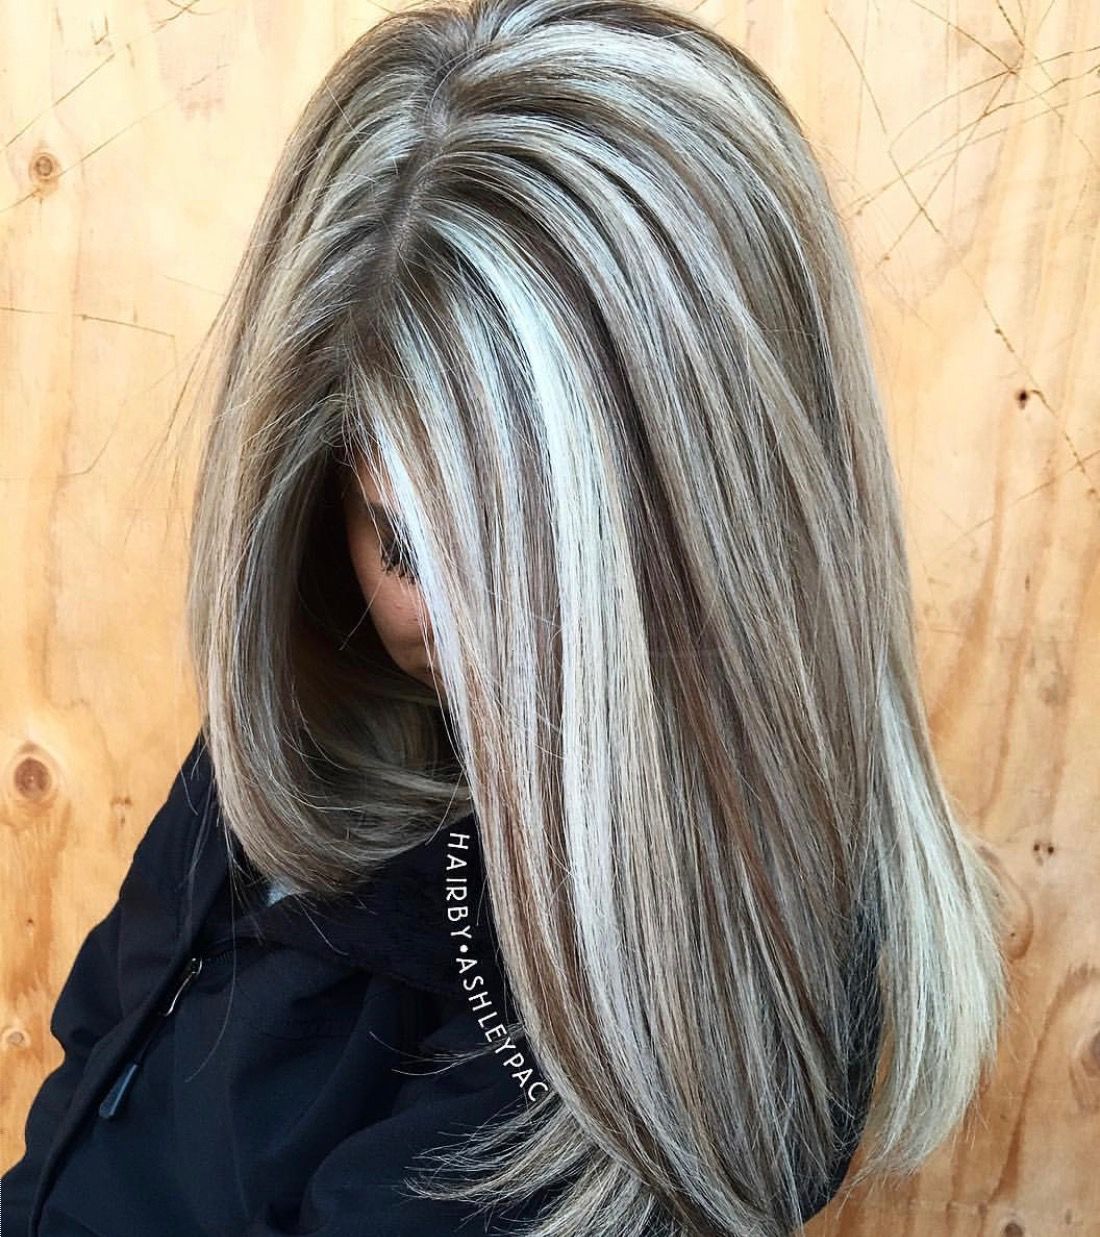 Do Blonde Highlights Help Hide Grey Hairs Naturally